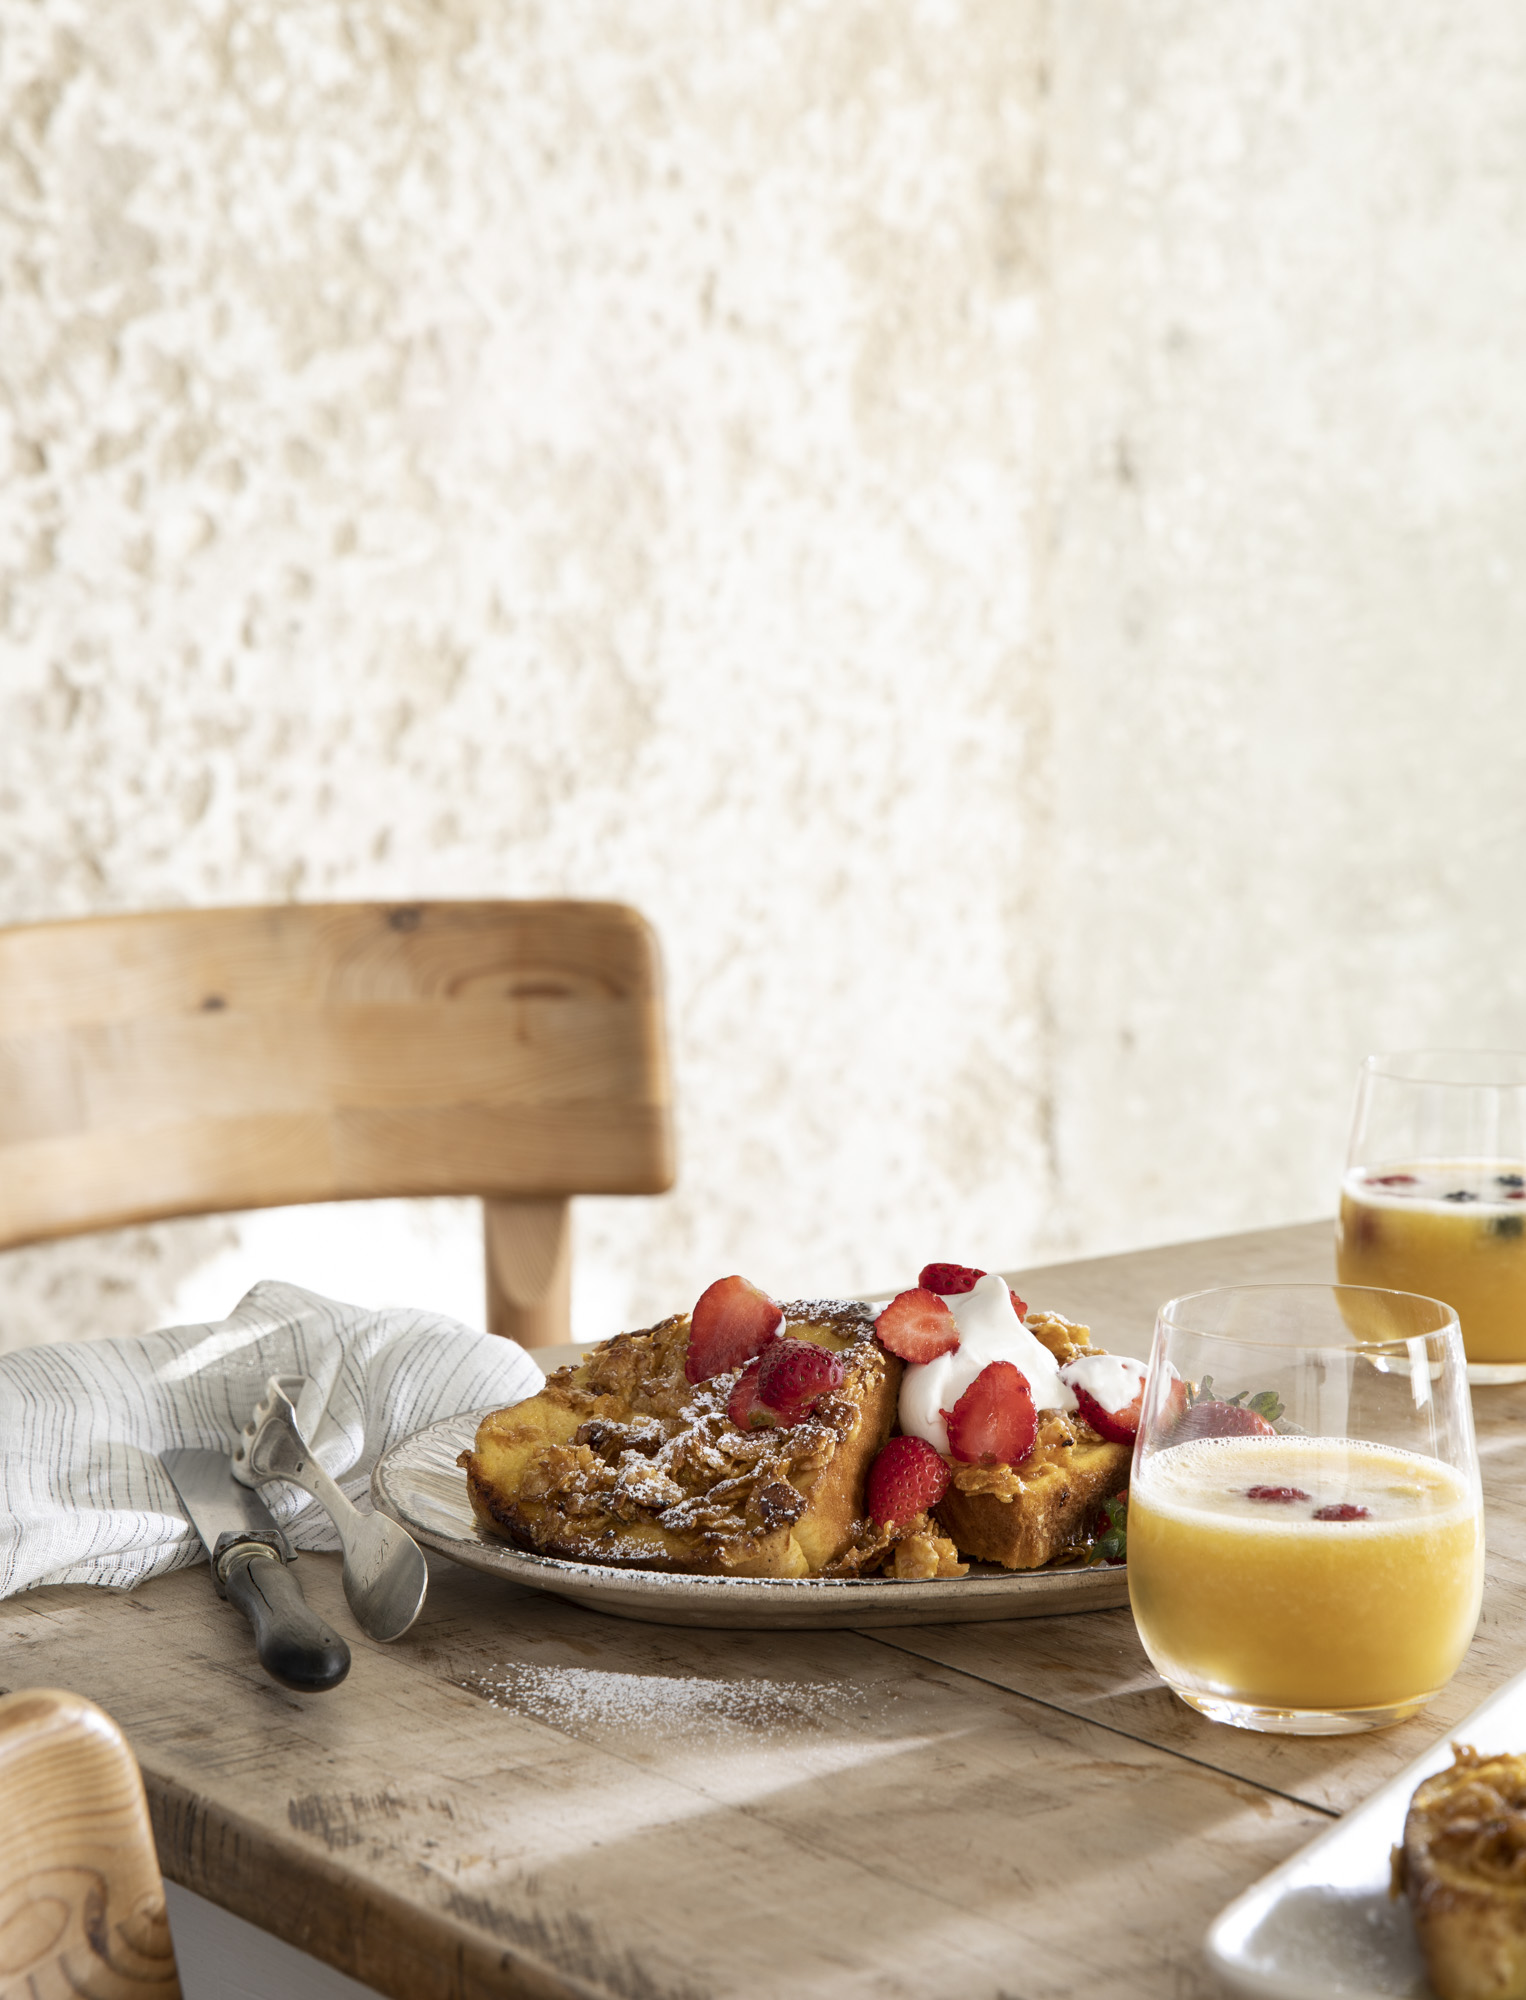 Joanna Gaines' French Toast Crunch sits on a plate atop a wooden table.